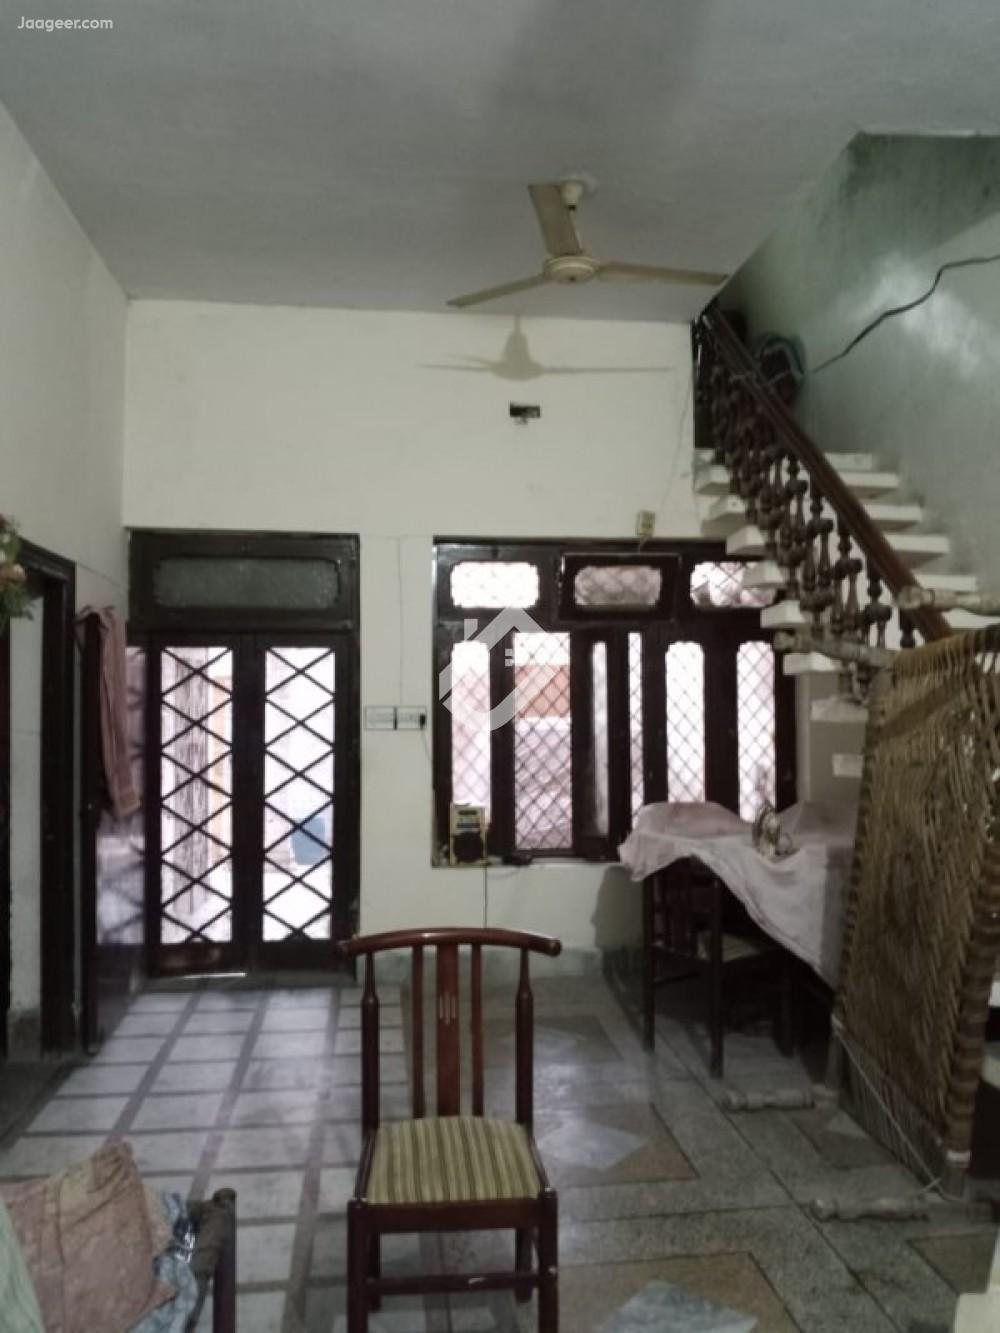 View  5 Marla Upper Portion House For Rent In Muradabad Colony in Muradabad Colony, Sargodha